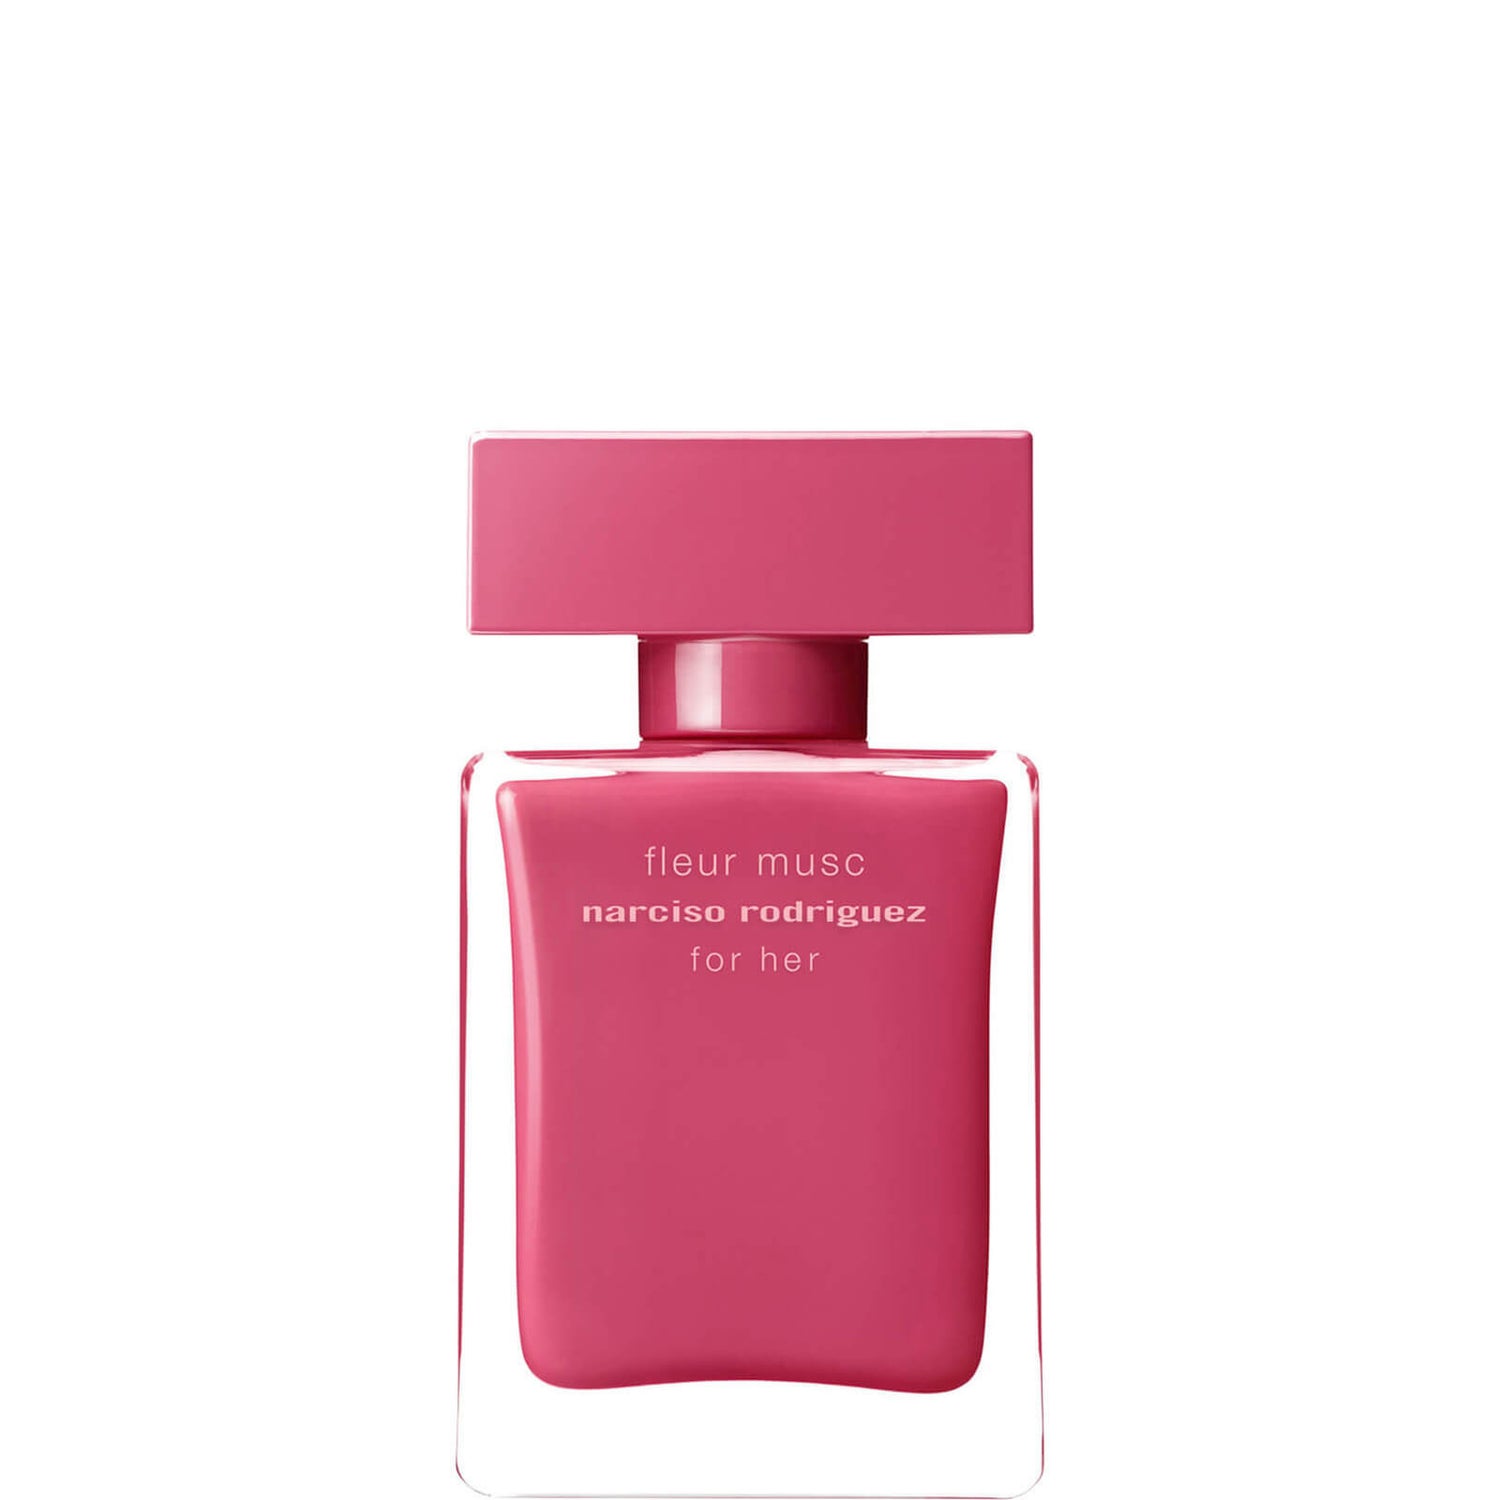 Родригес флер. Narciso Rodriguez fleur Musc for her, 100 ml. Narciso Rodriguez fleur Musc for her 20мл. Narciso Rodriguez for her fleur Musc EDP 50ml. Духи fleur Musc Narciso Rodriguez for her.